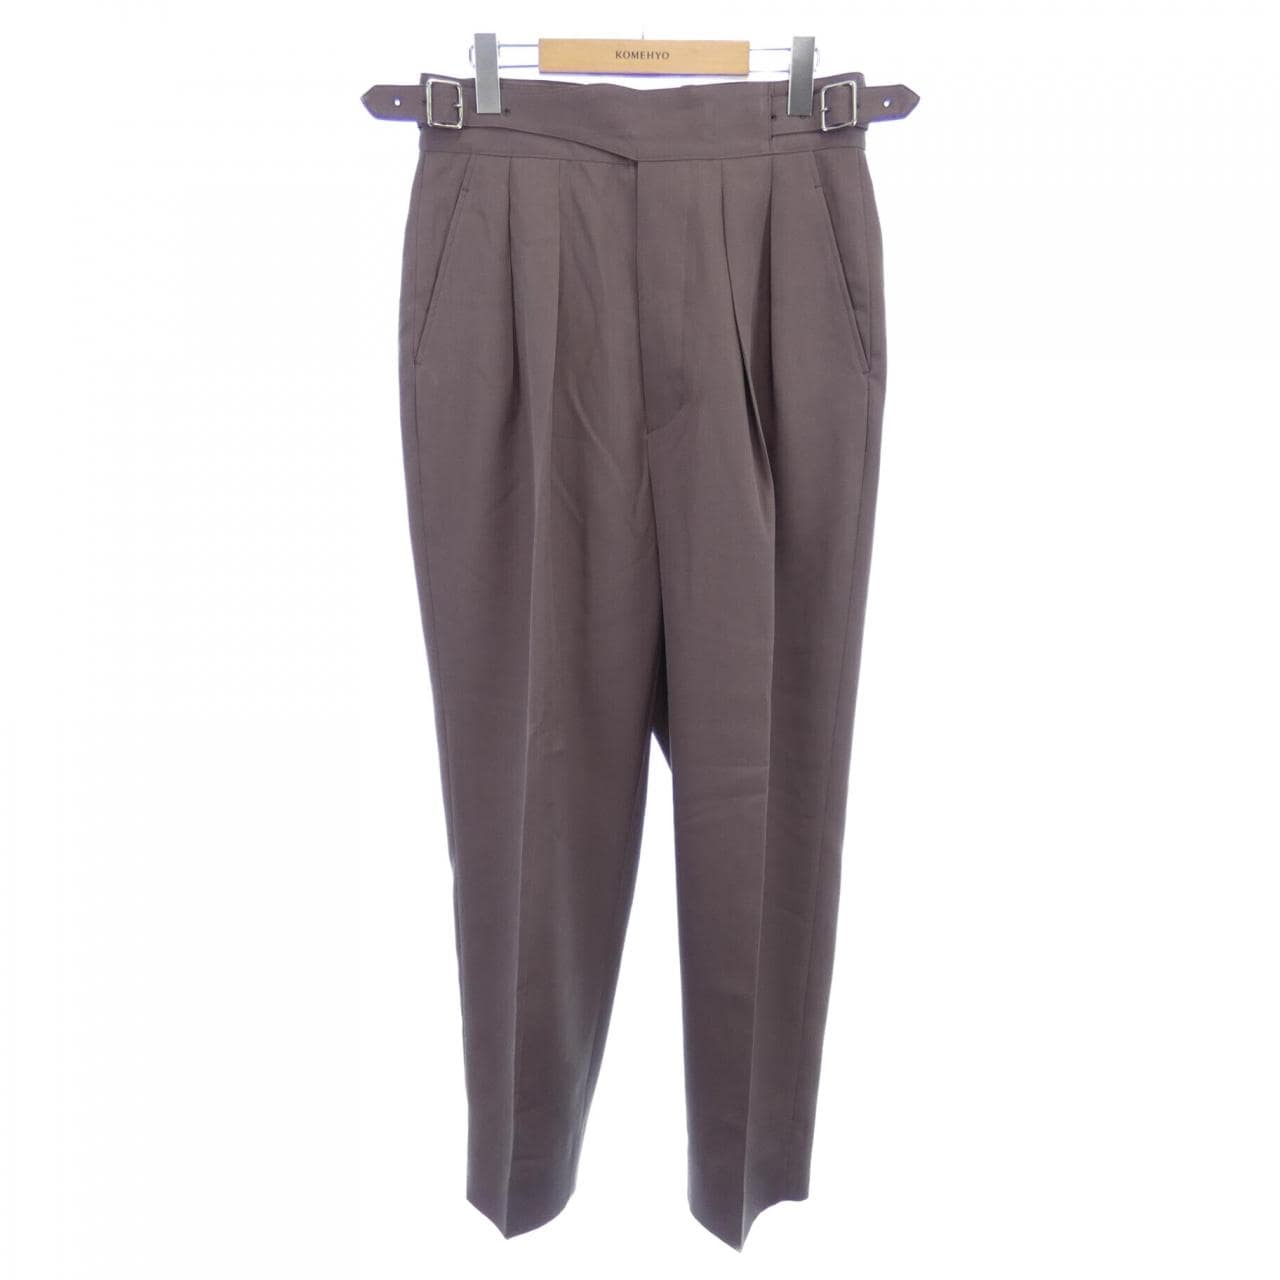 The Classic The CLASIK Pants